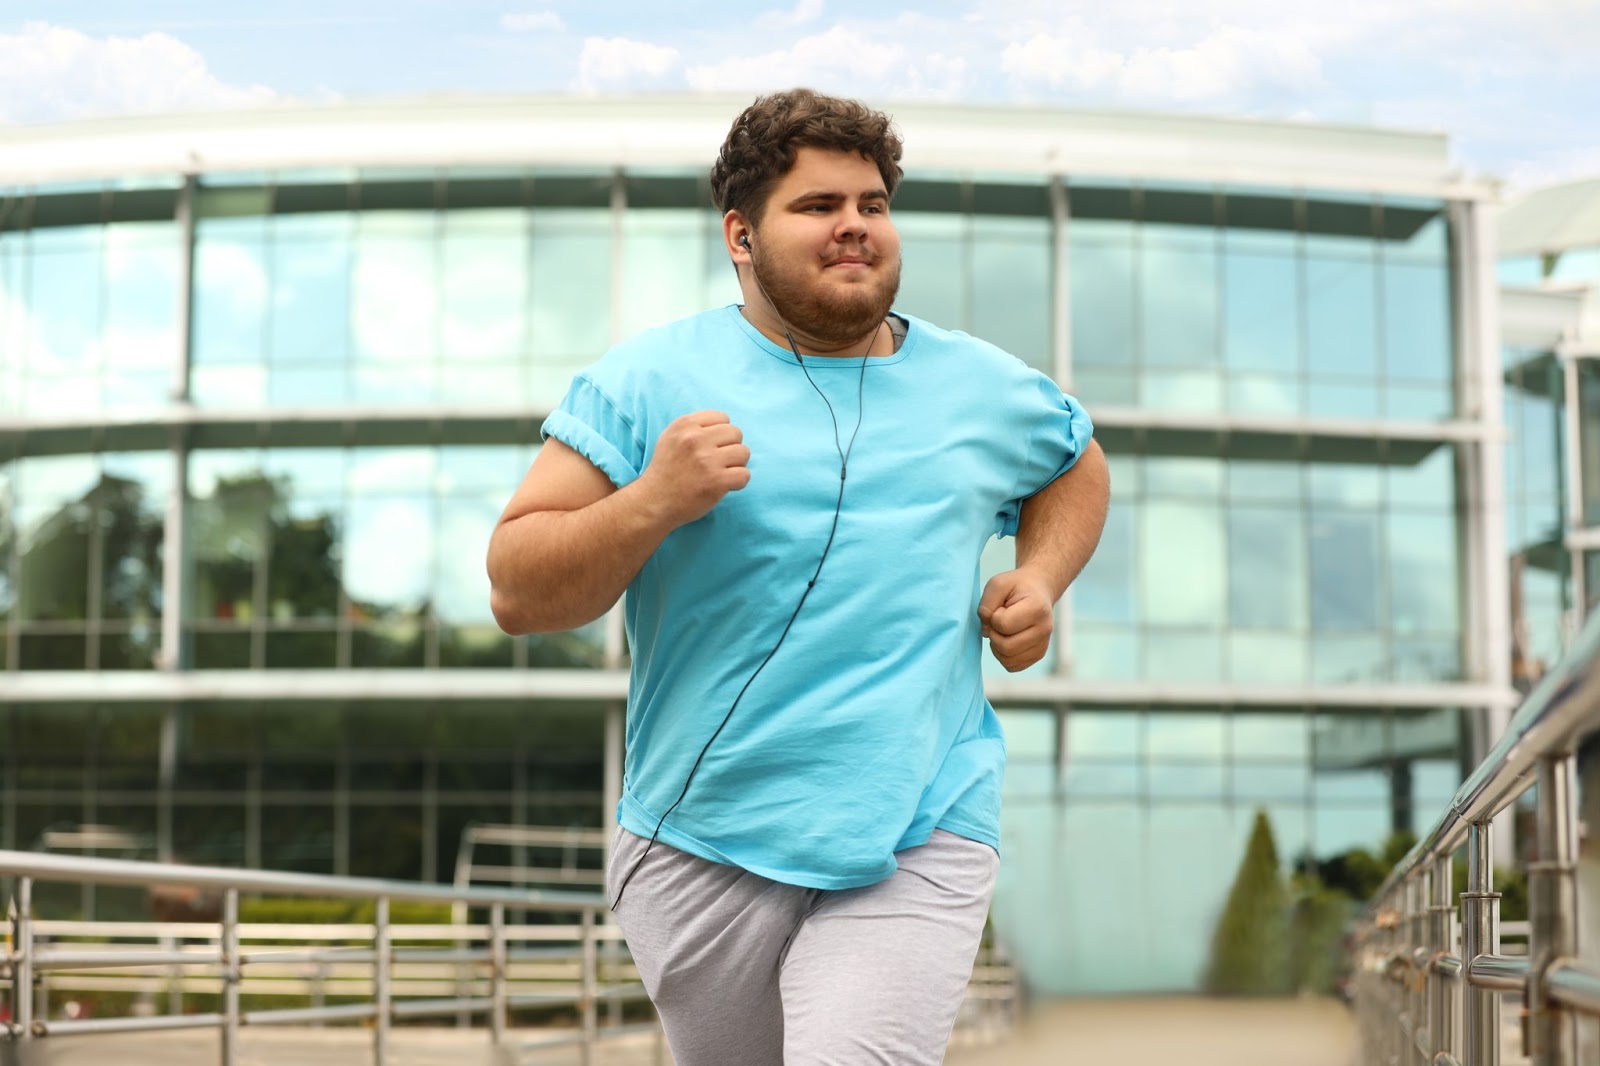 How to improve your cardio workouts to lose more weight